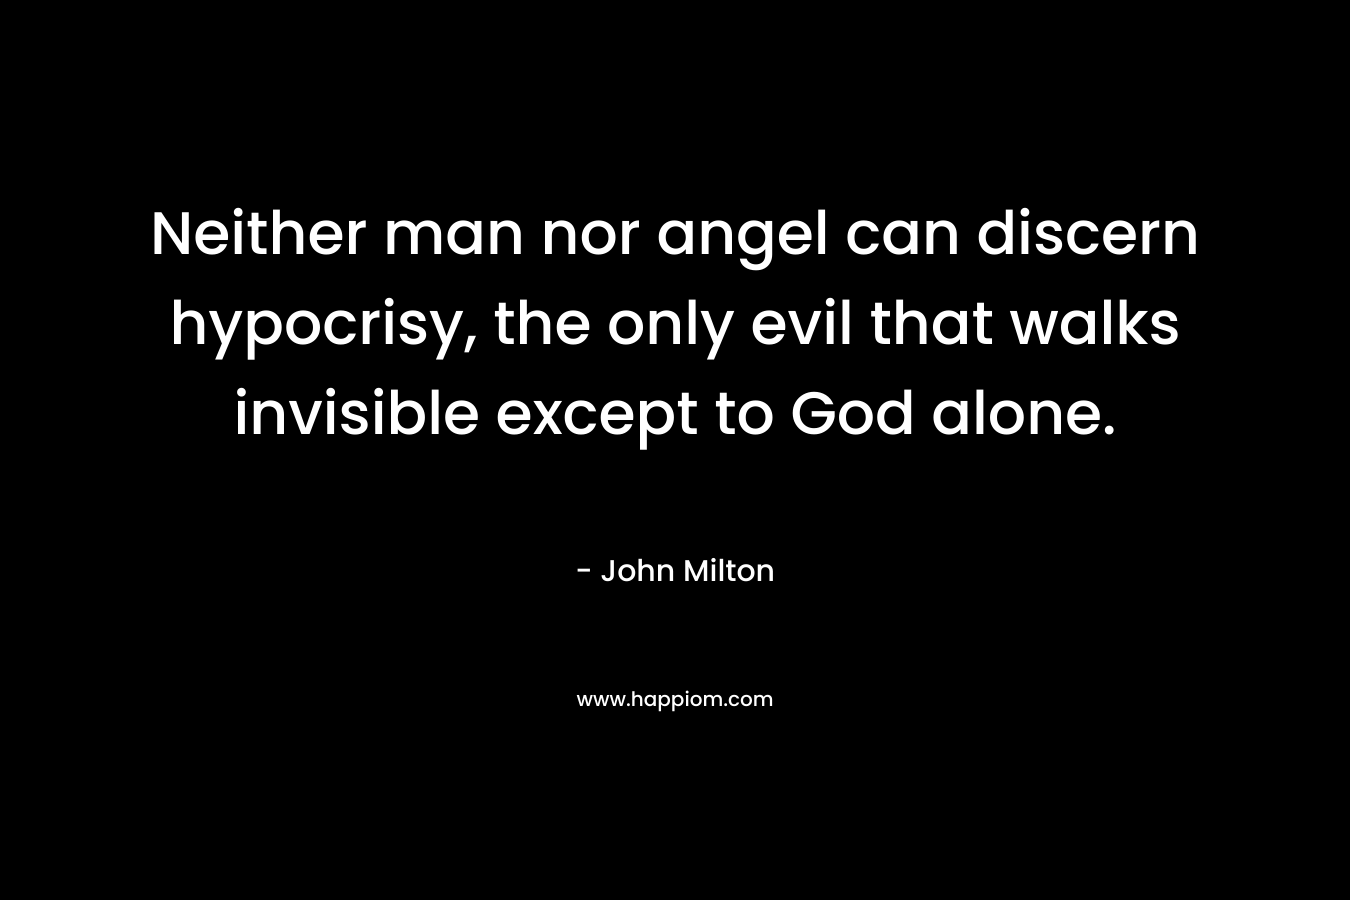 Neither man nor angel can discern hypocrisy, the only evil that walks invisible except to God alone. – John Milton